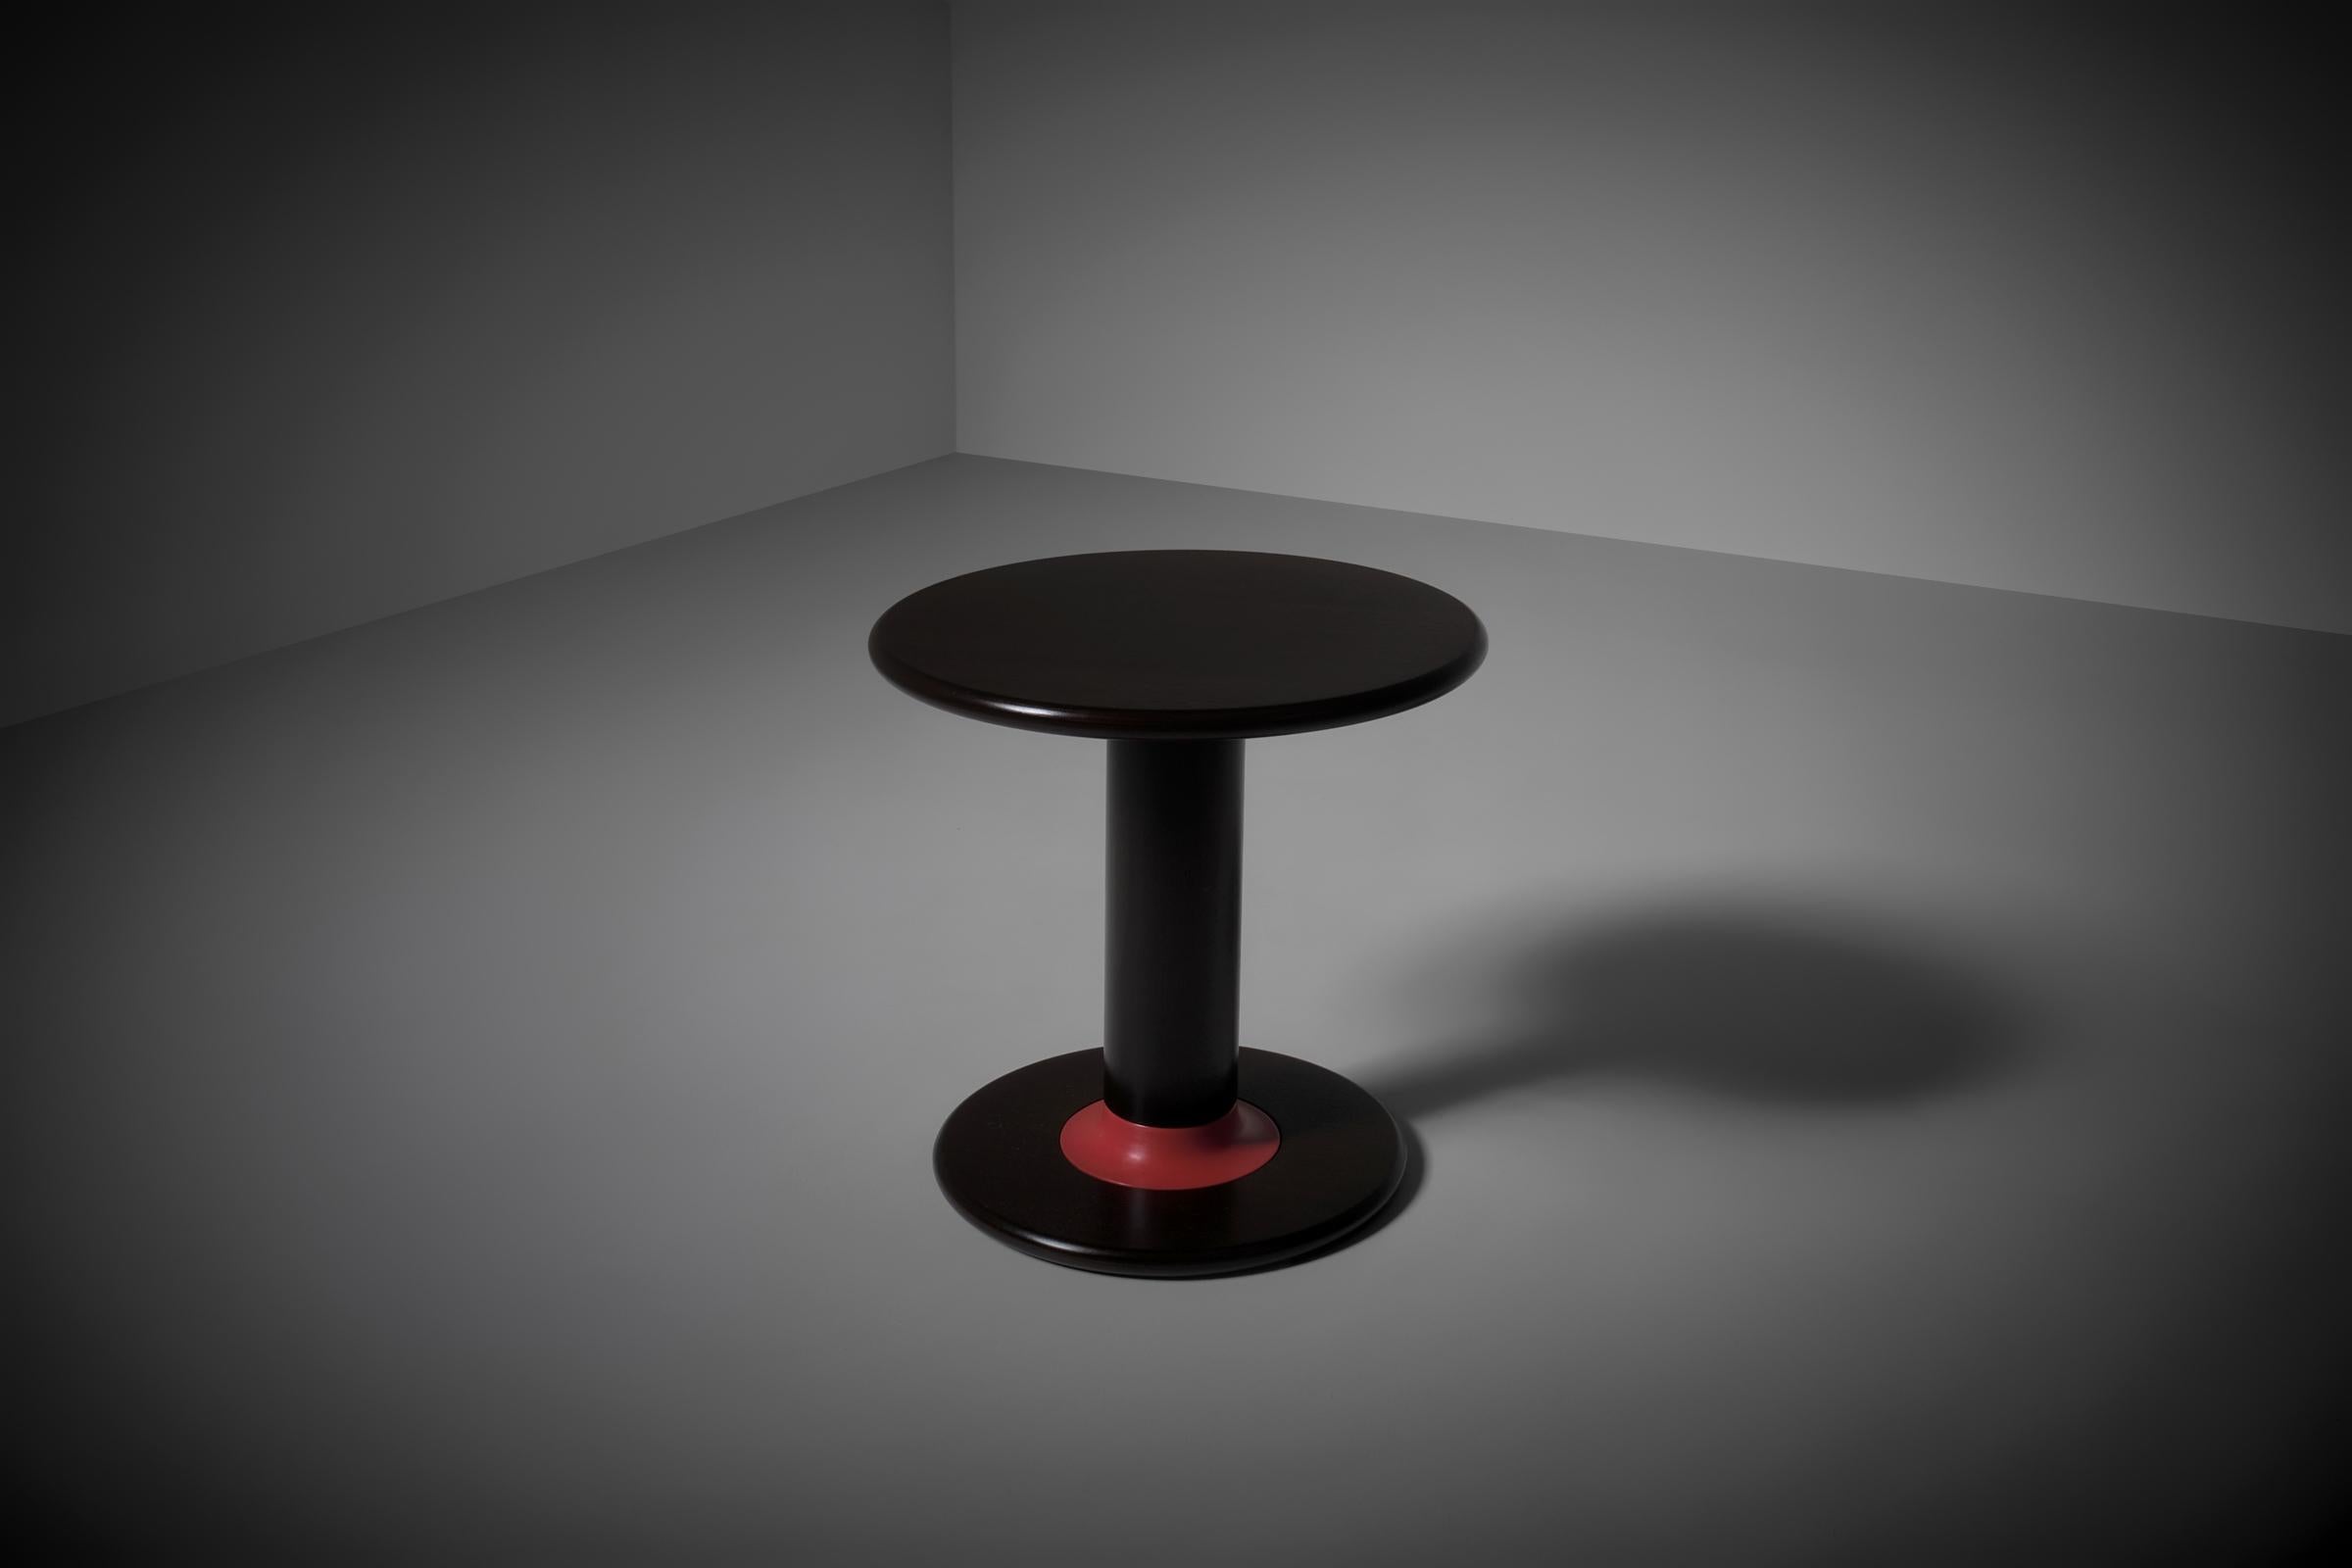 Stained Ettore Sottsass ‘Rocchetto’ side table for Poltronova, Italy 1964